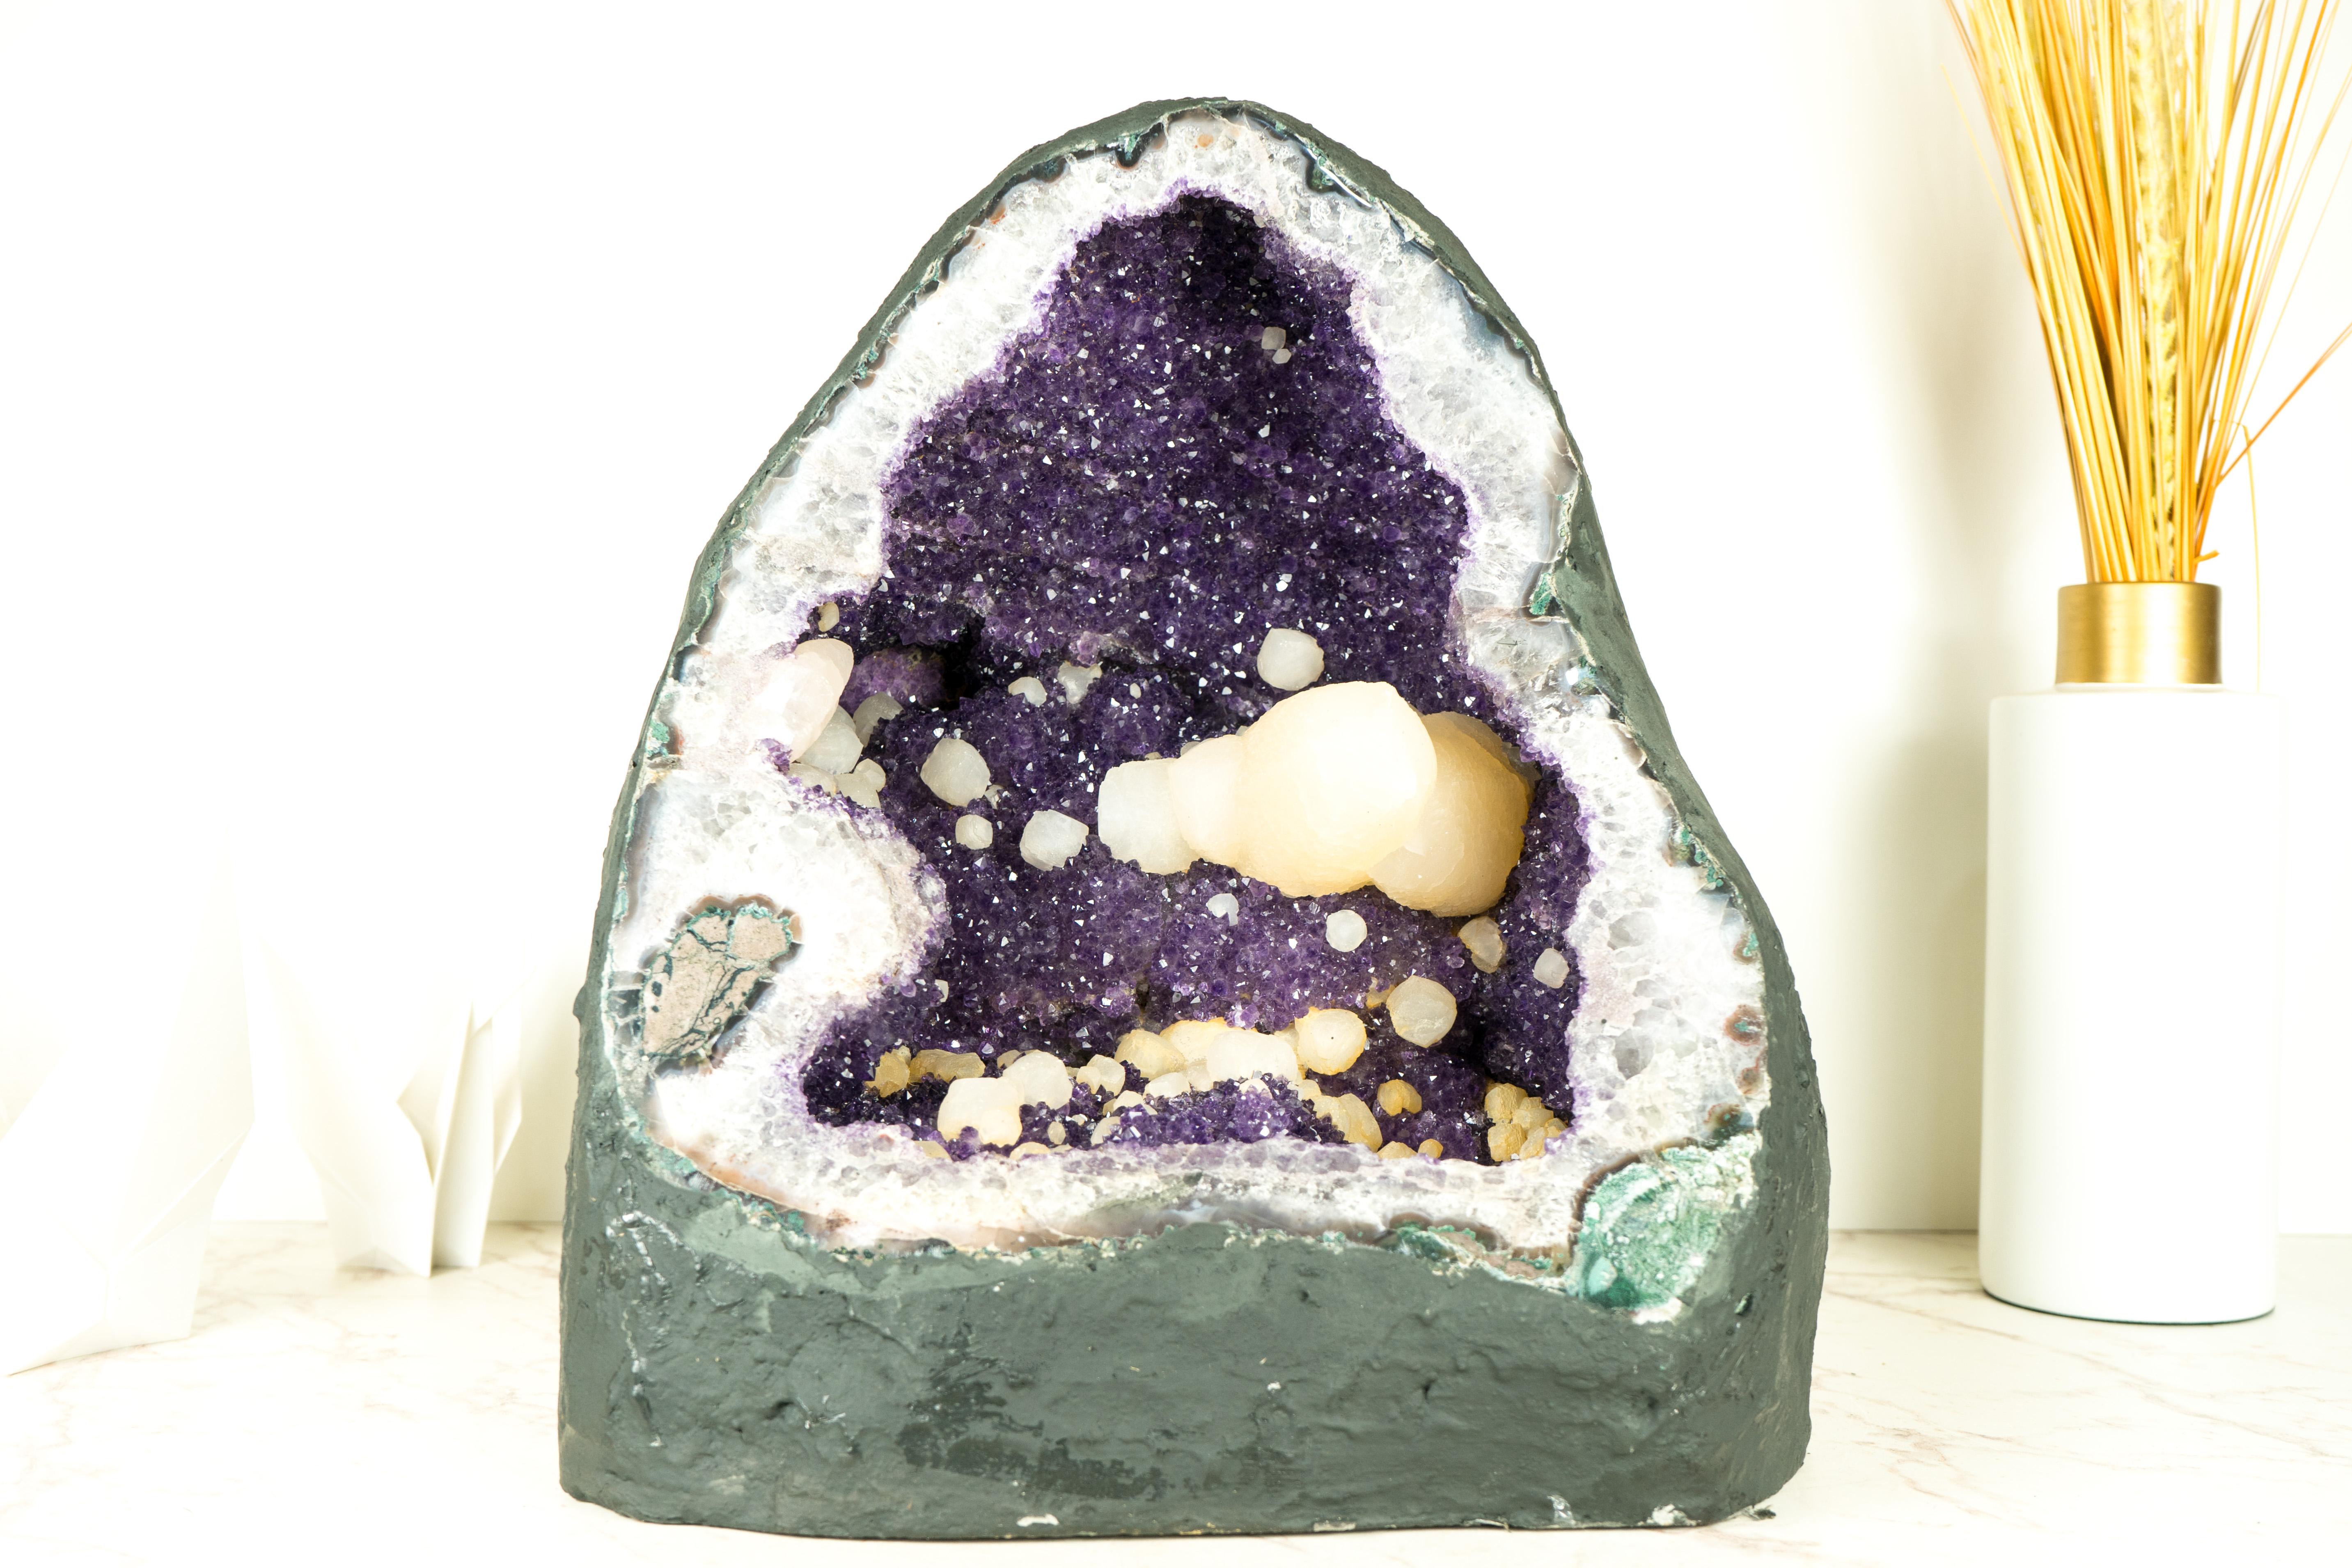 Brazilian Natural Uruguayan Amethyst Geode with Rare Calcite and Sparkly Purple Amethyst For Sale